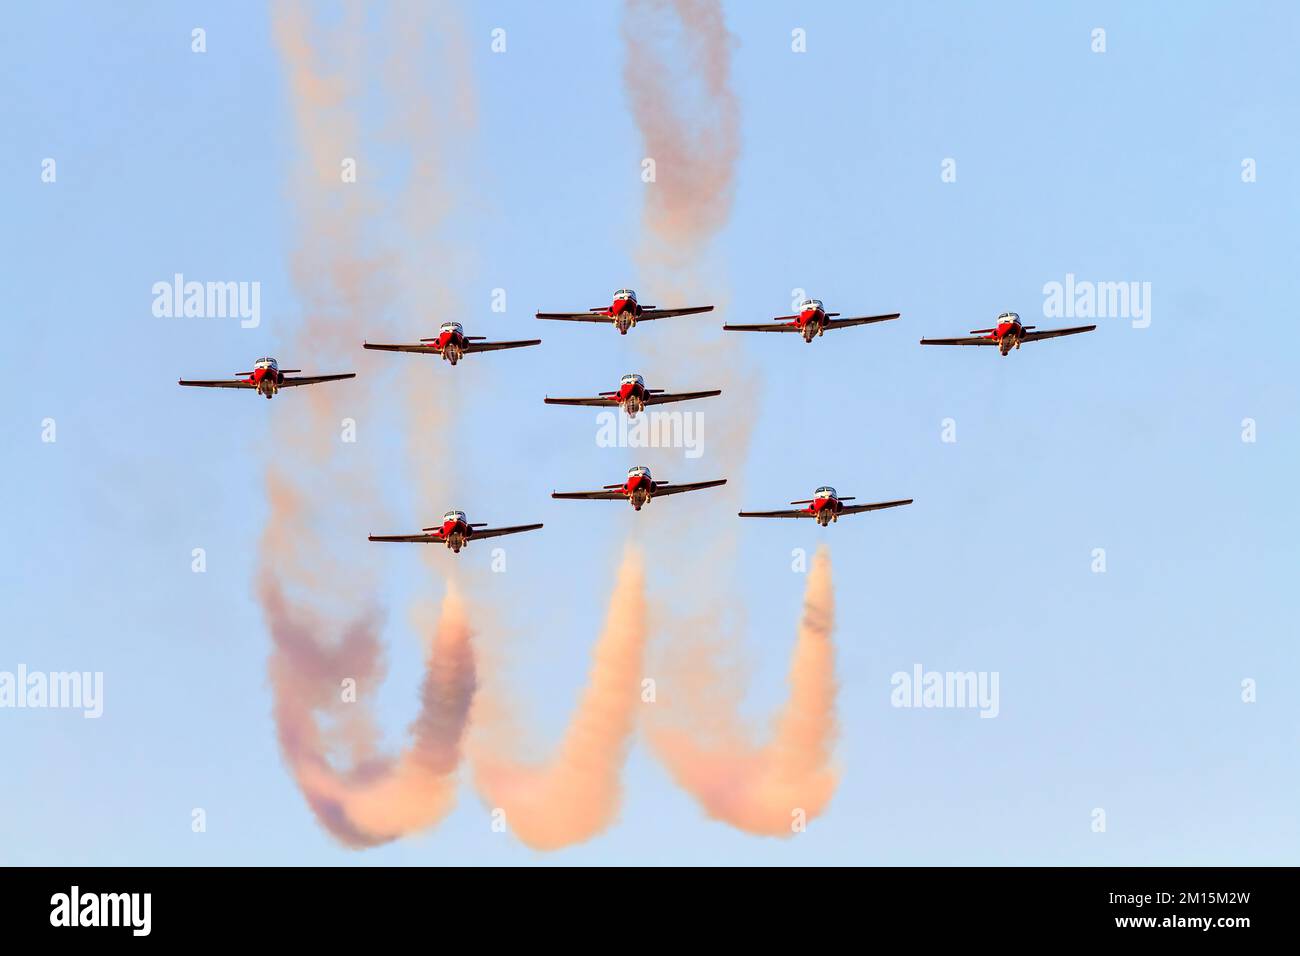 The Royal Canadian Air Force (RCAF) 431 Demonstration Squadron Snowbirds performing at 2017 Airshow London. Stock Photo